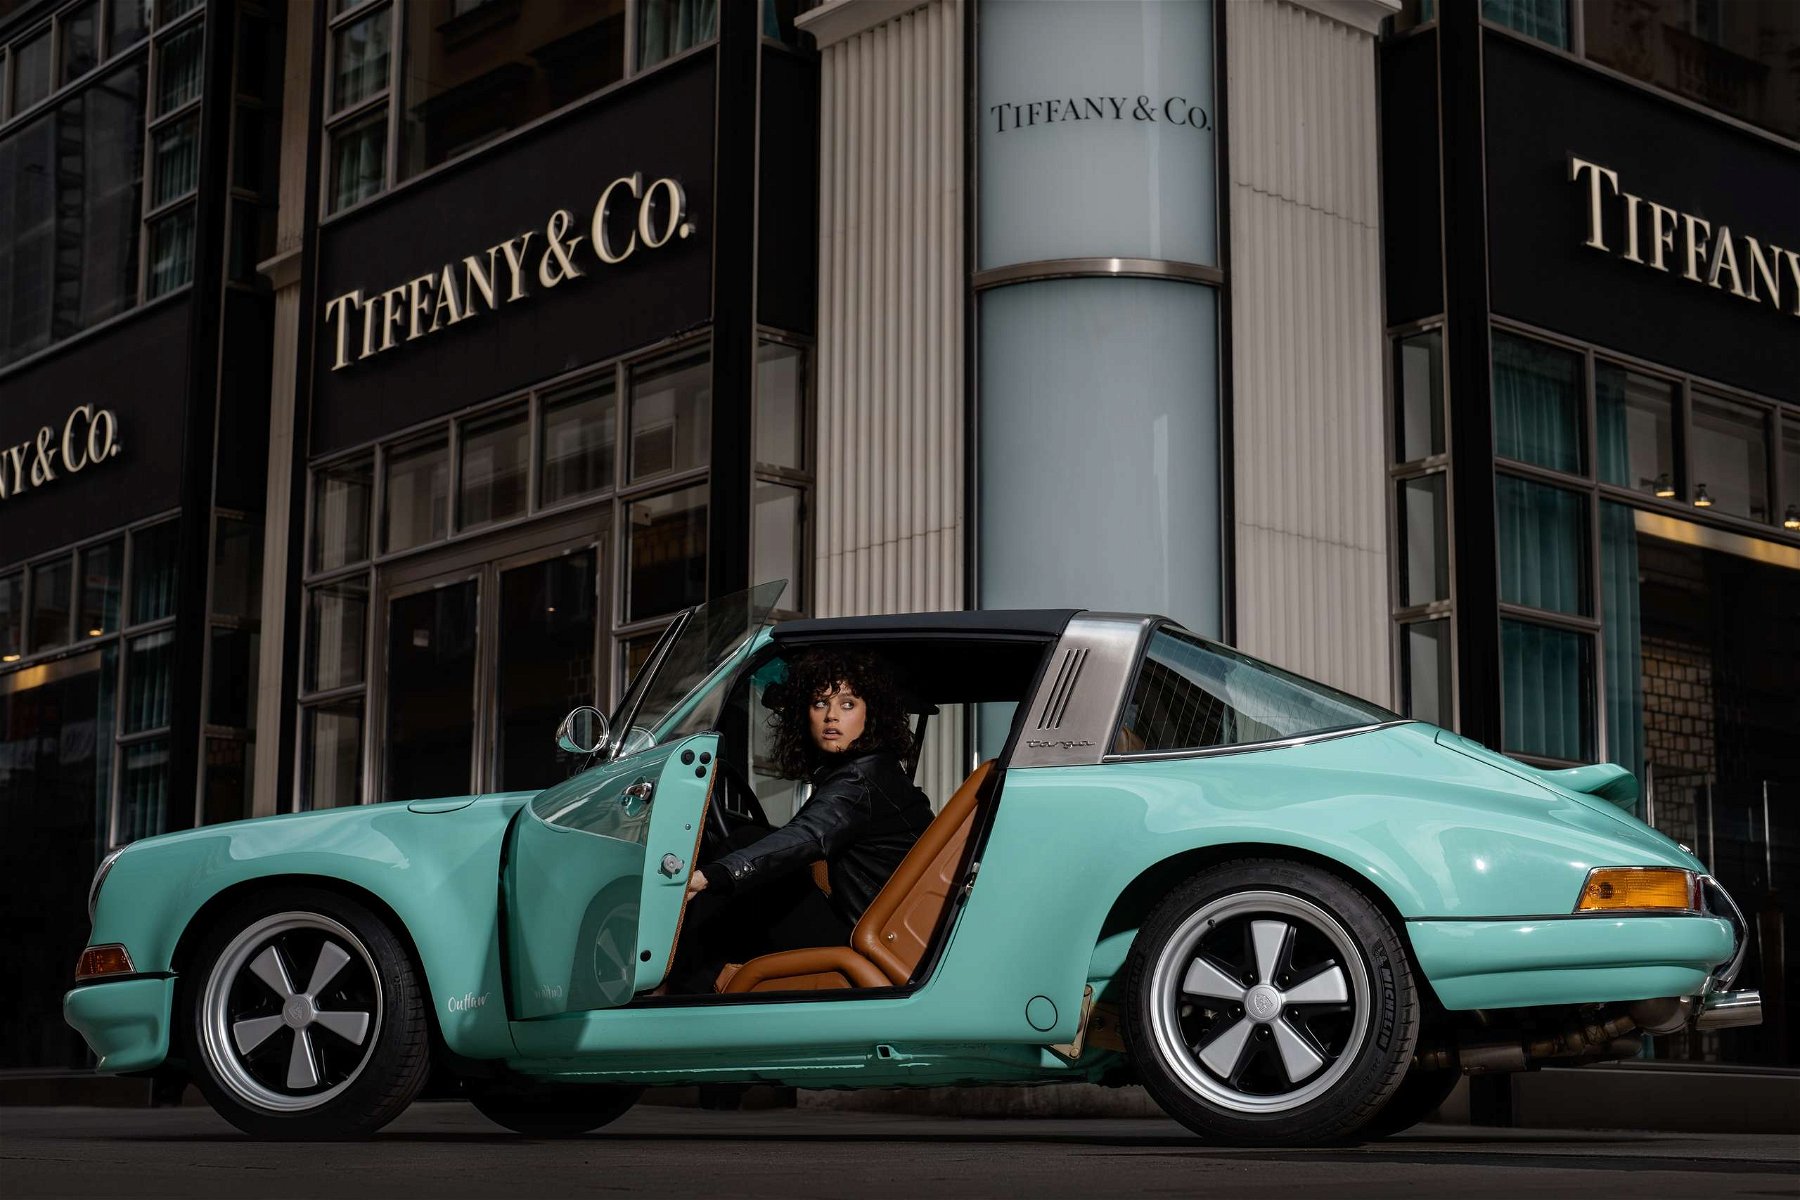 “Tiffany” Porsche by Vehicle Experts